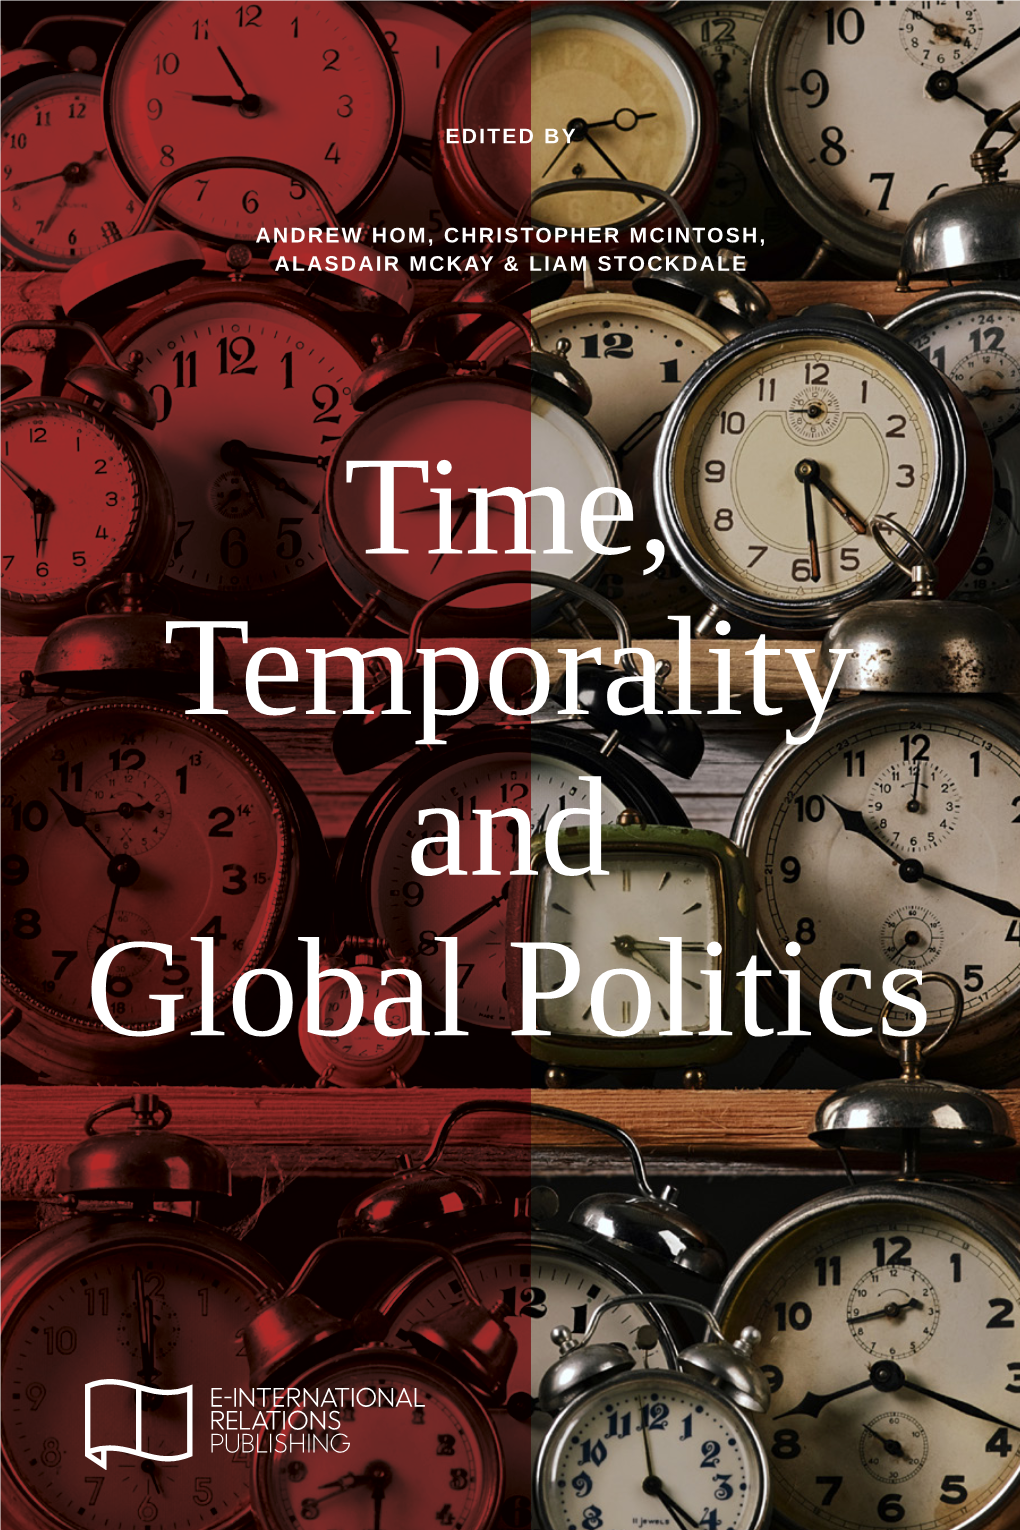 Time, Temporality and Global Politics I ﻿